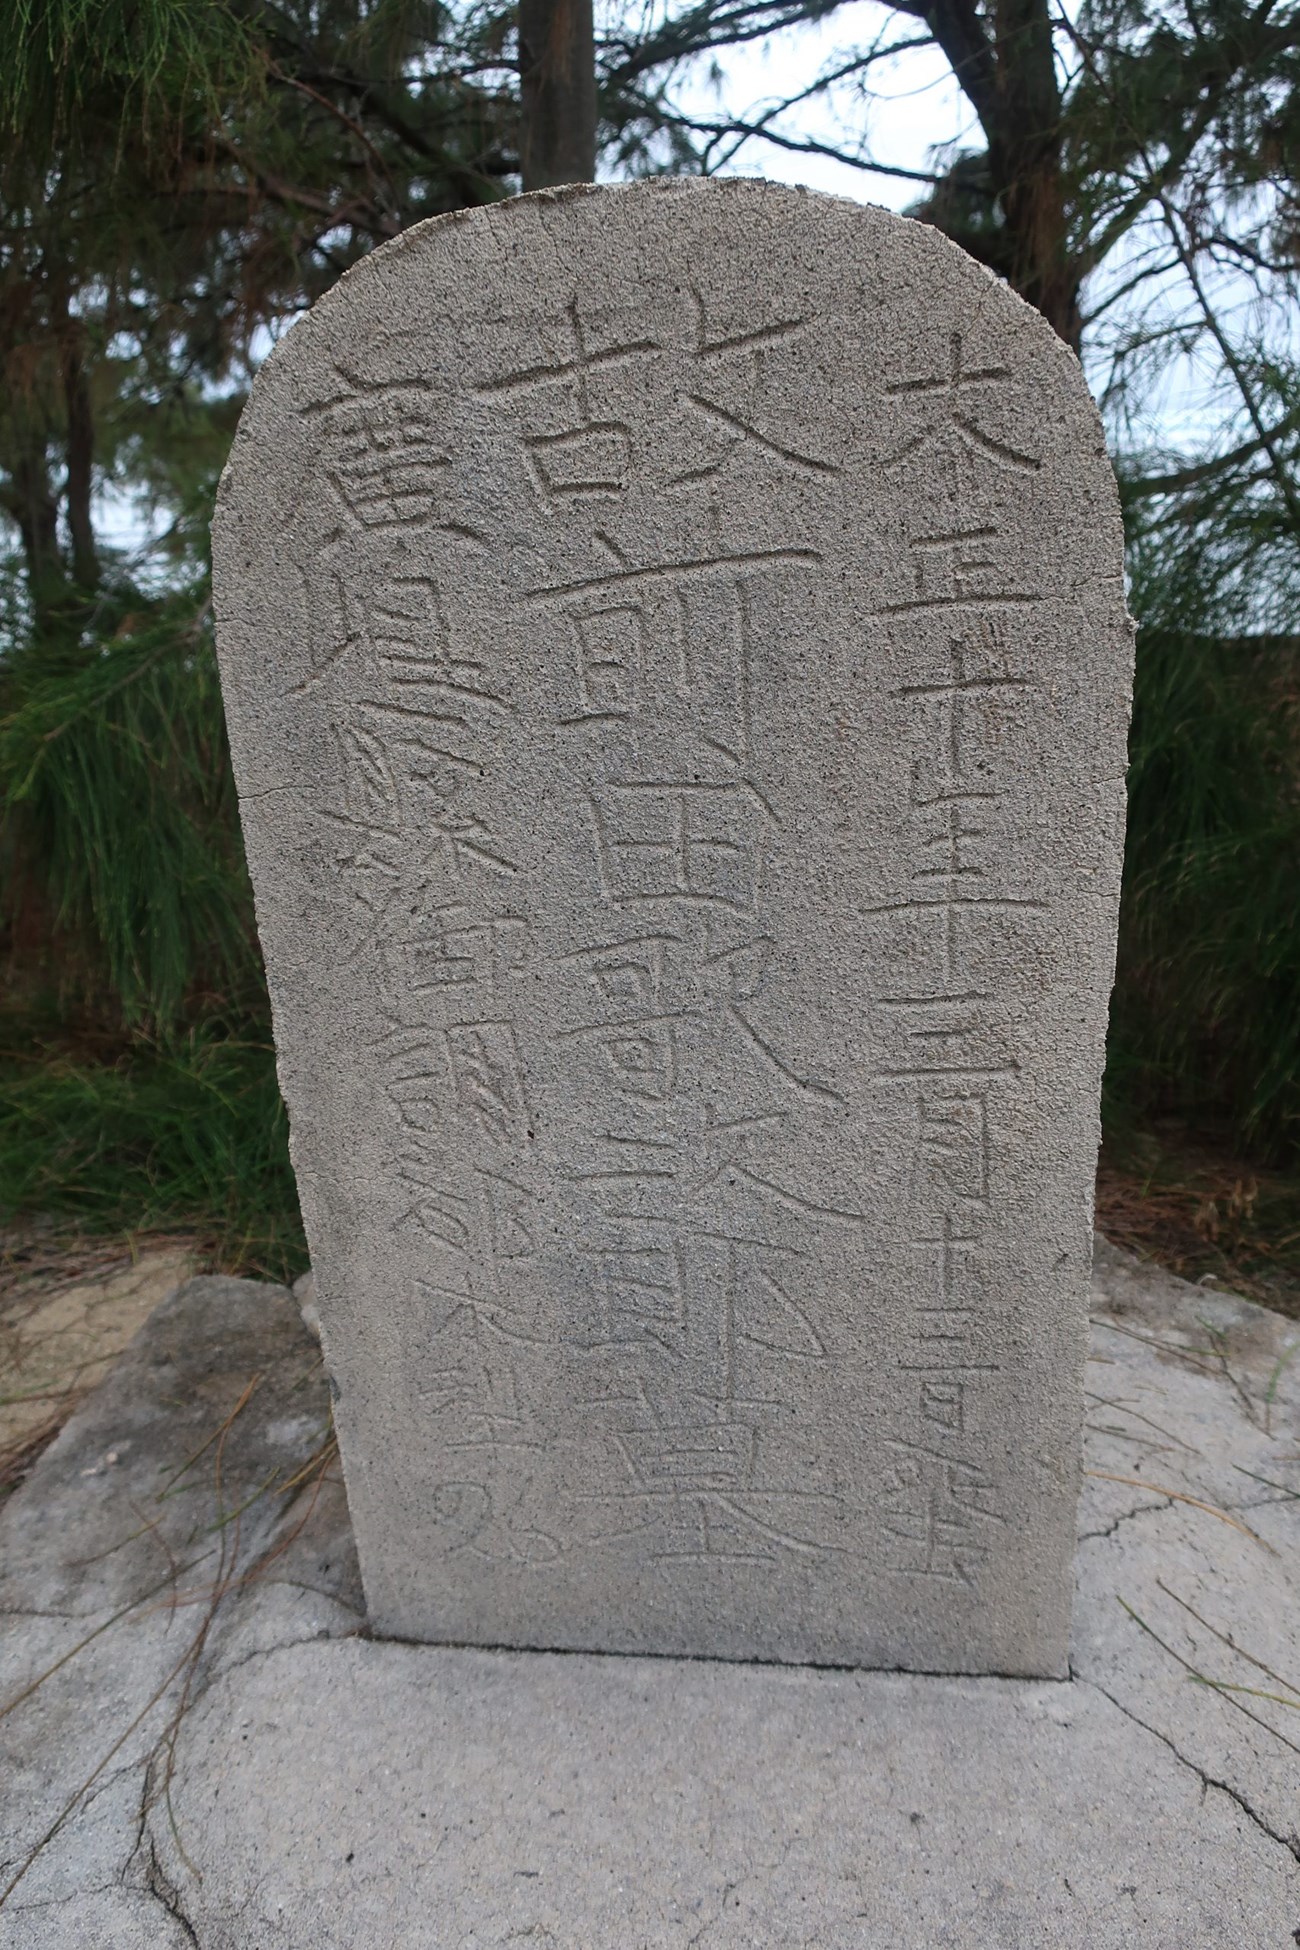 Cast concrete grave marker with finely inscribed characters.